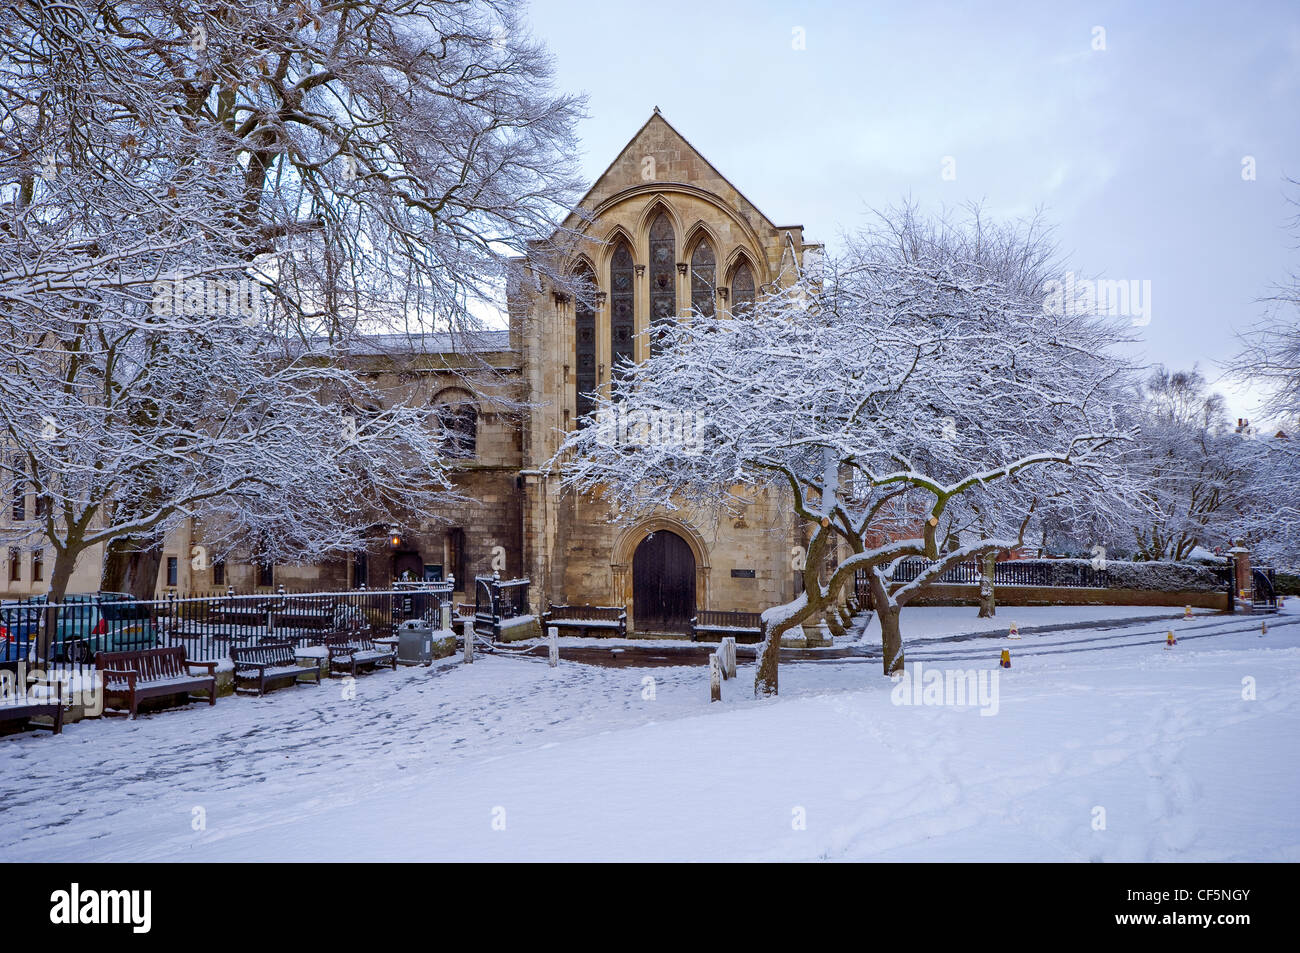 York Minster Library (1230), the largest cathedral library in England, viewed from the snow covered grounds of Deans Park. Stock Photo